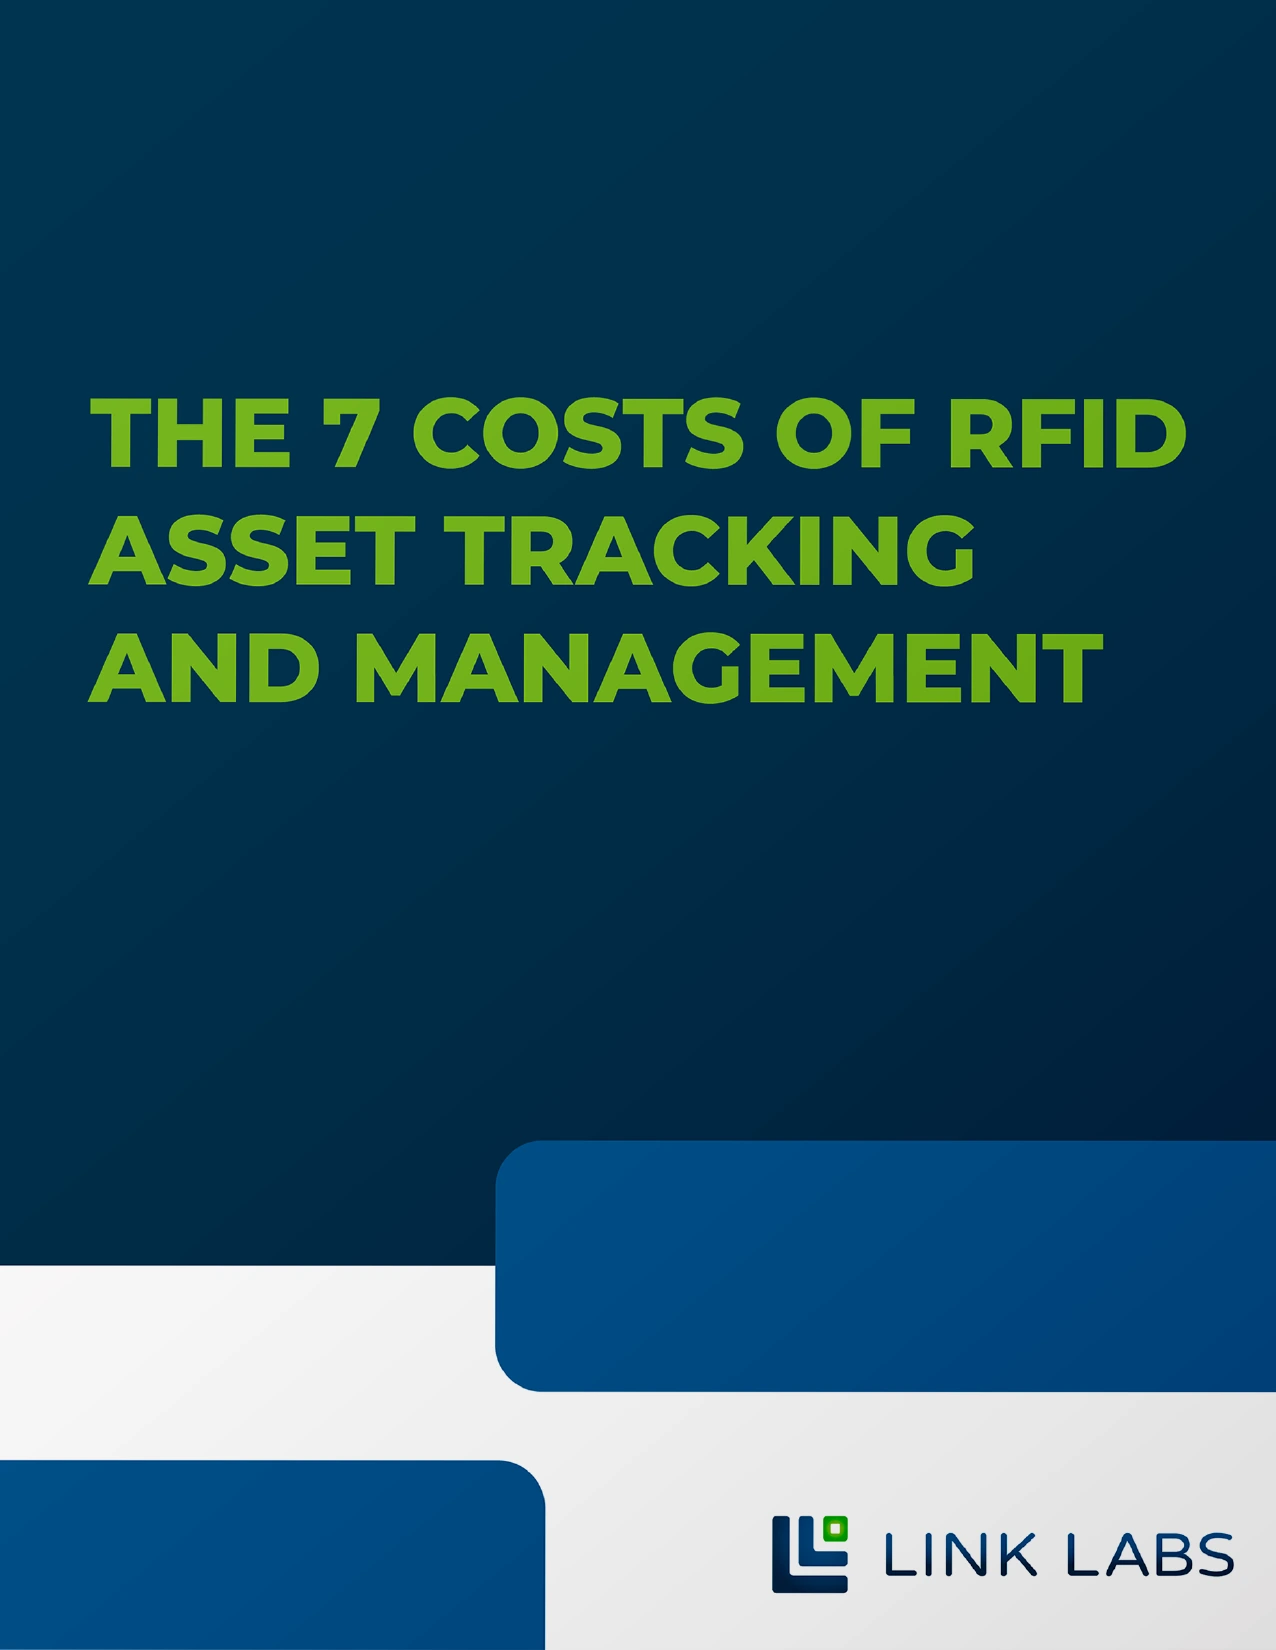 The-7-Costs-of-RFID-Whitepaper-Thumbnail (1)